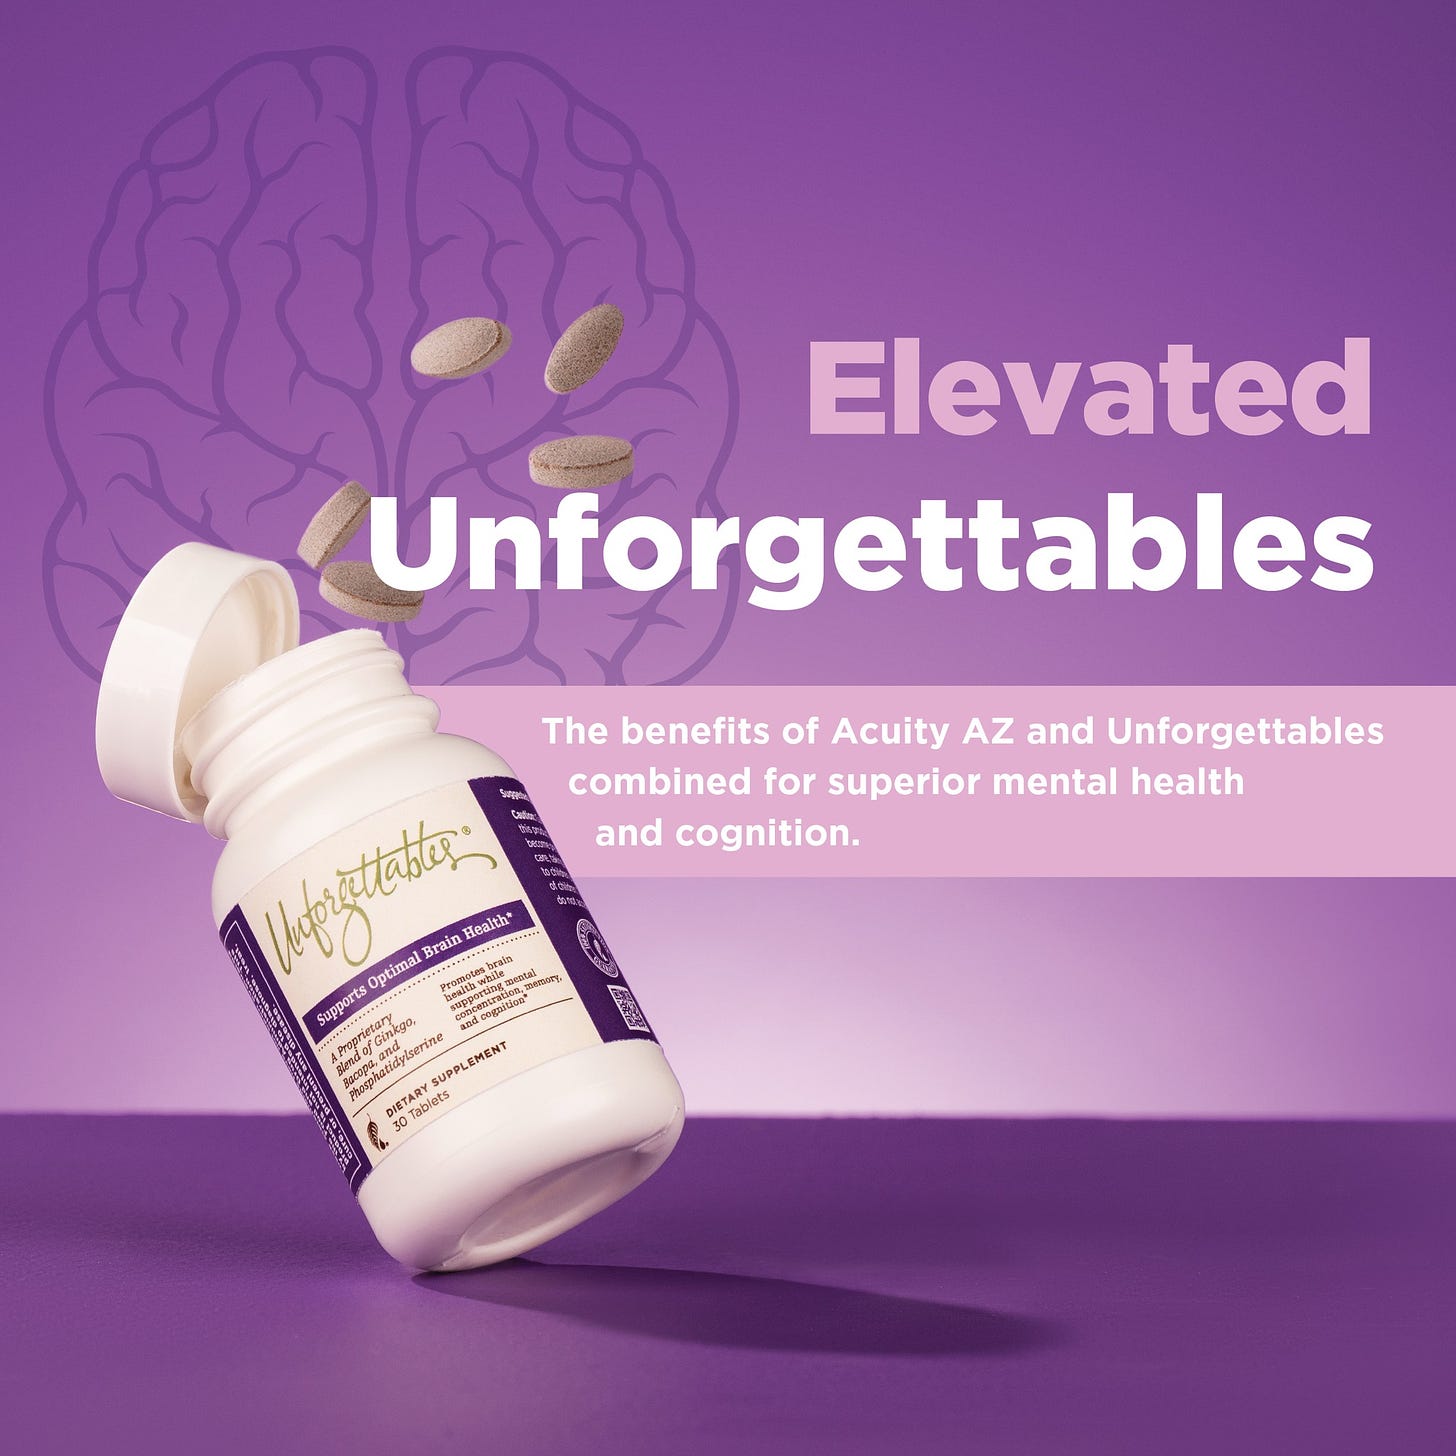 May be an image of text that says 'Elevated Unforgettables The benefits of Acuity AZ and Unforgettables combined for superior mental health Mfpritatto Optimal Brain and cognition. PLEMENT 30Tablt l'